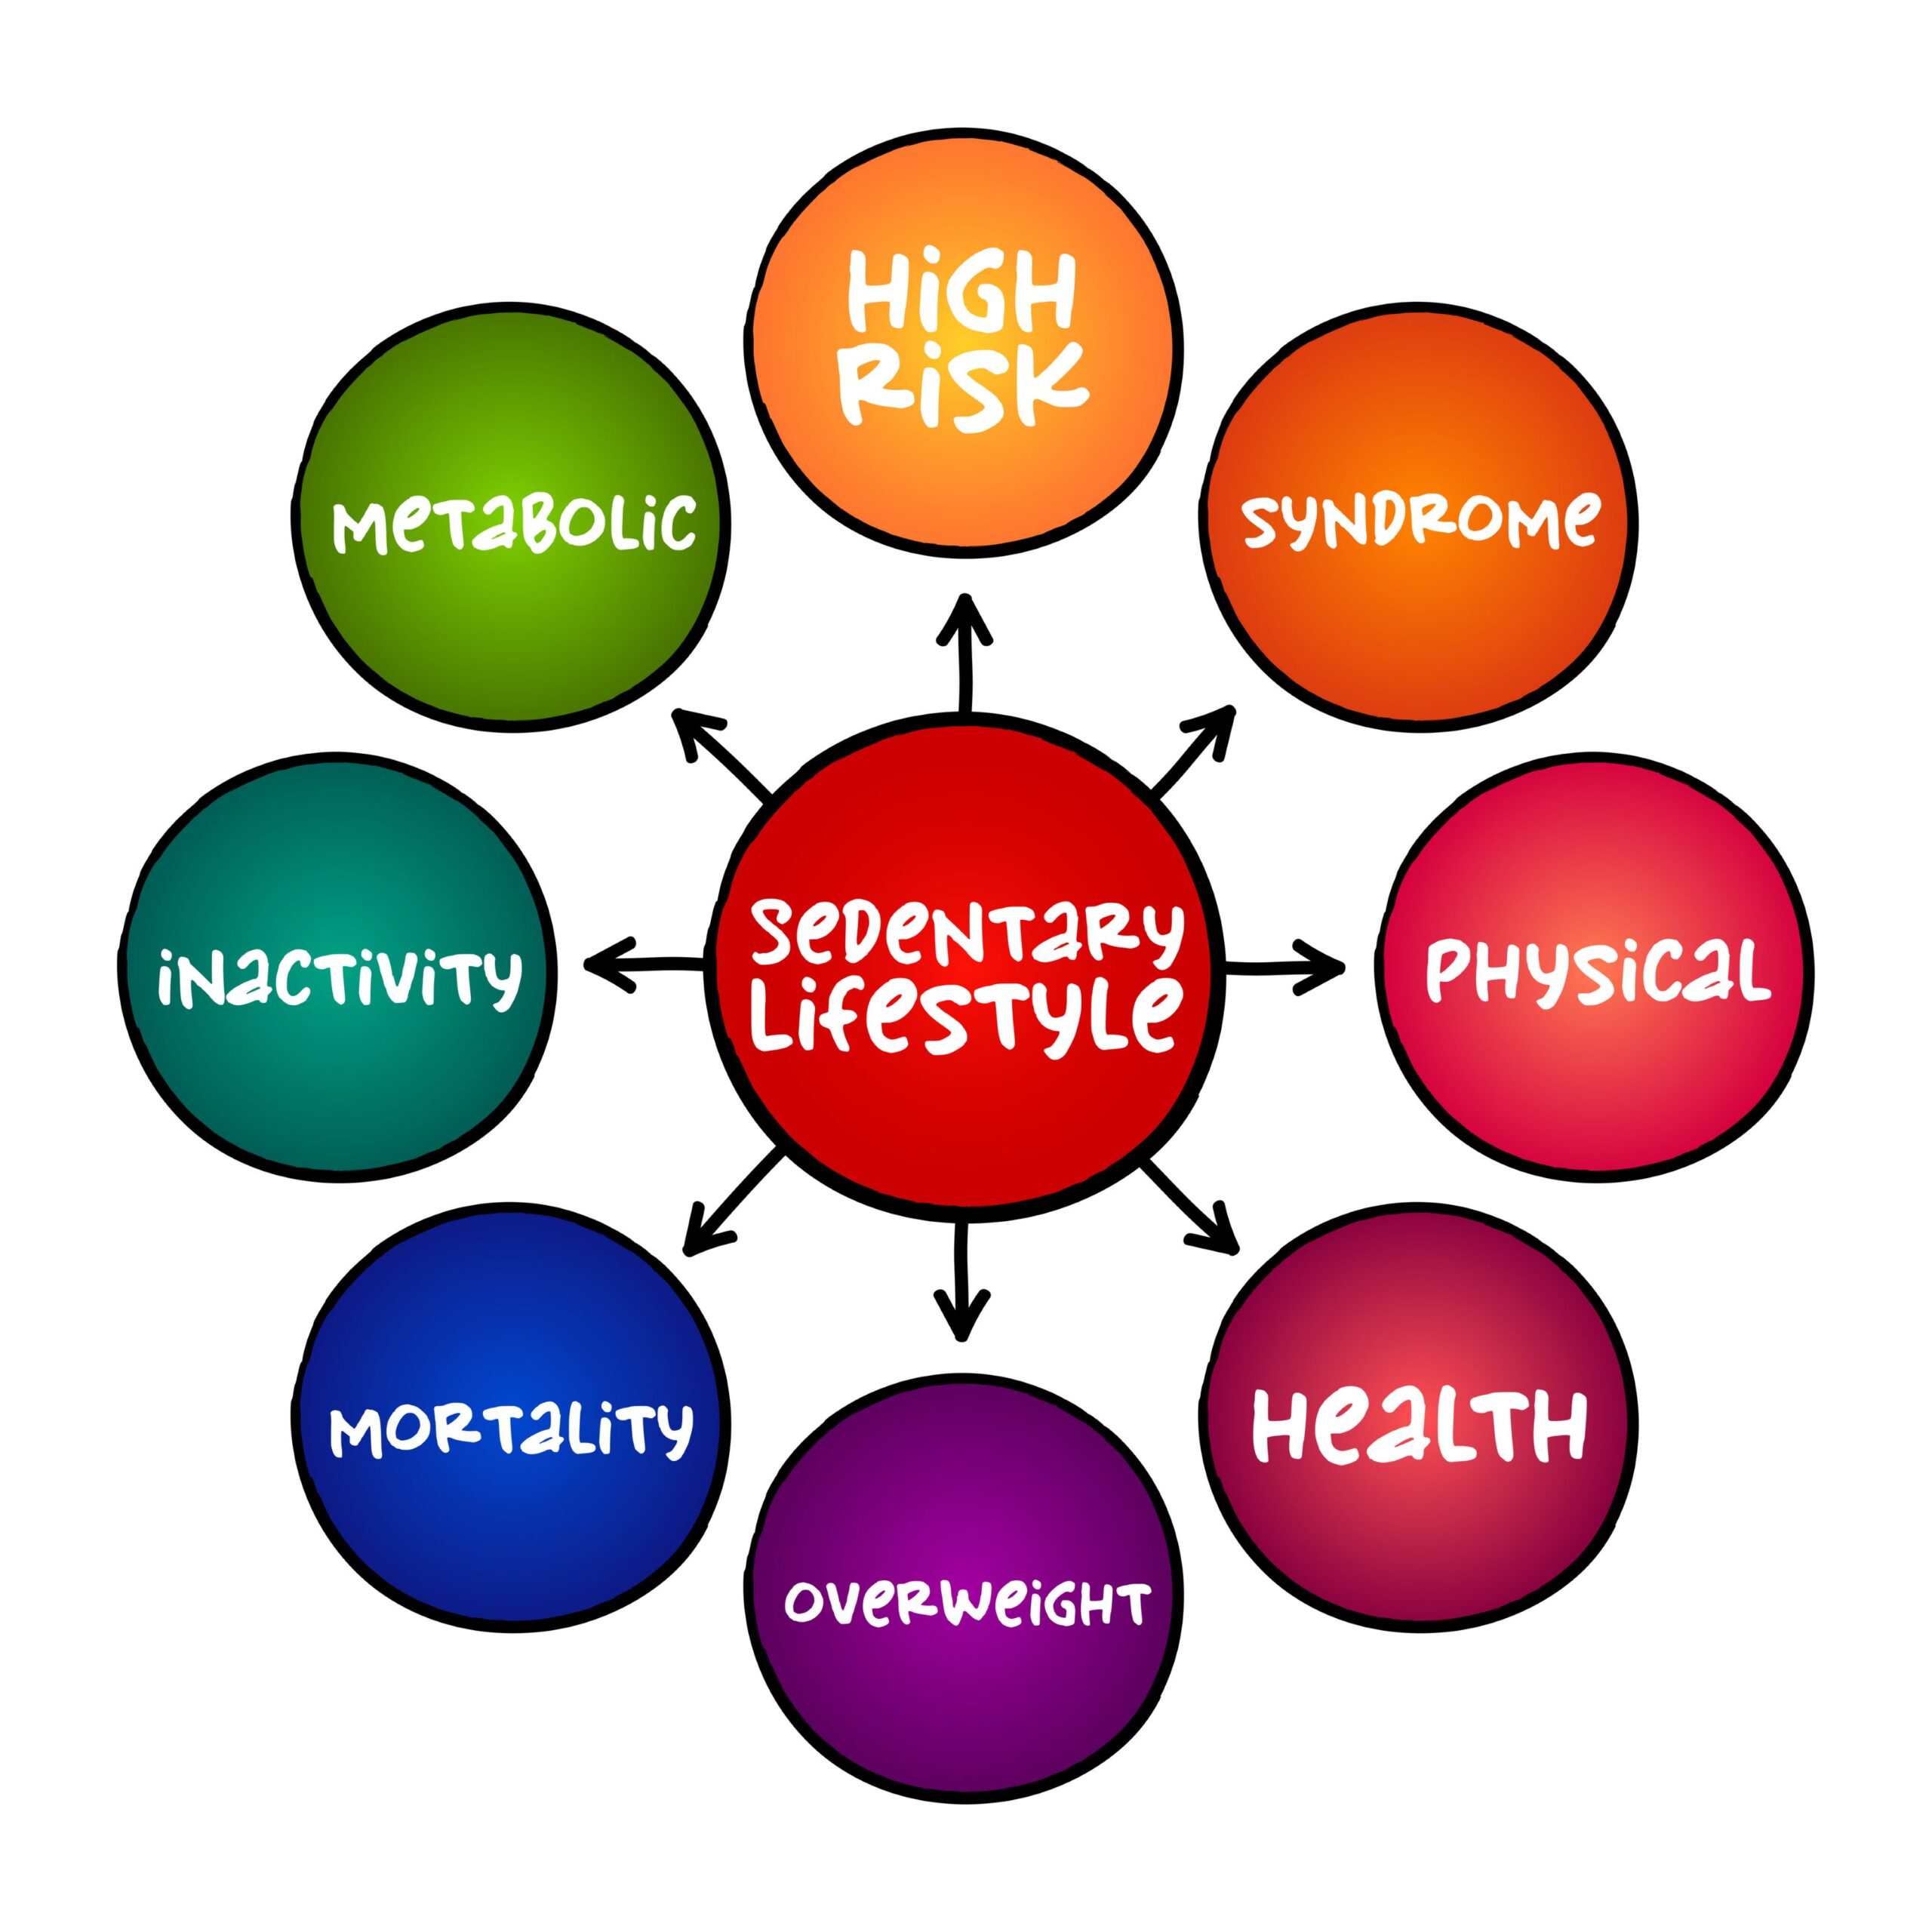 20-25 Minutes Of Daily Physical Activity May Offset Death Risk From Prolonged Sitting